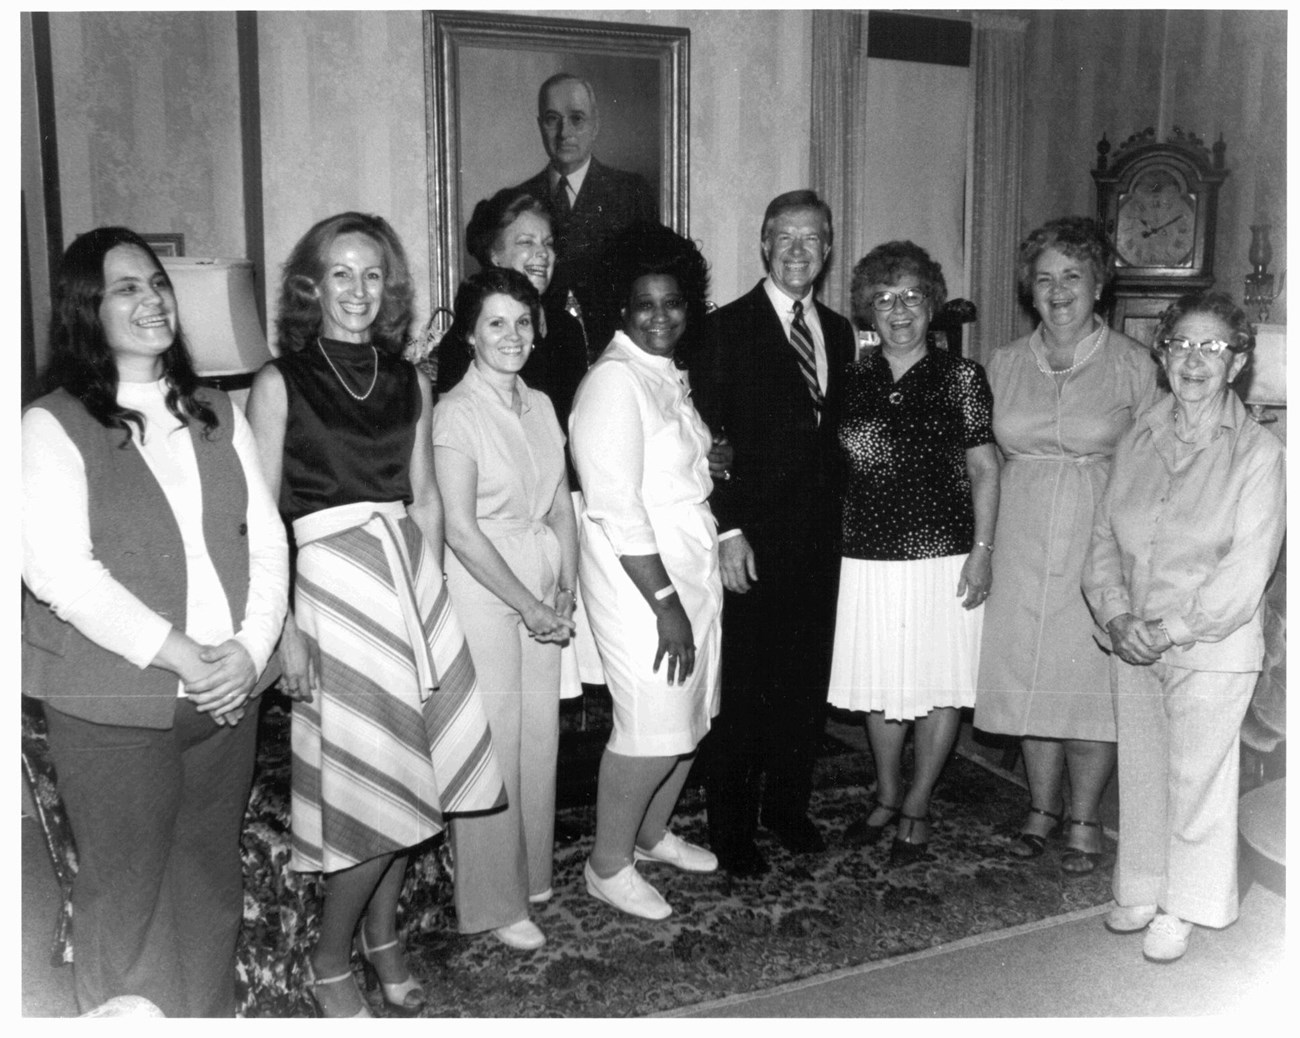 President Jimmy Carter posing with Mrs. Truman's aides in front of painting of Harry Truman, 1980